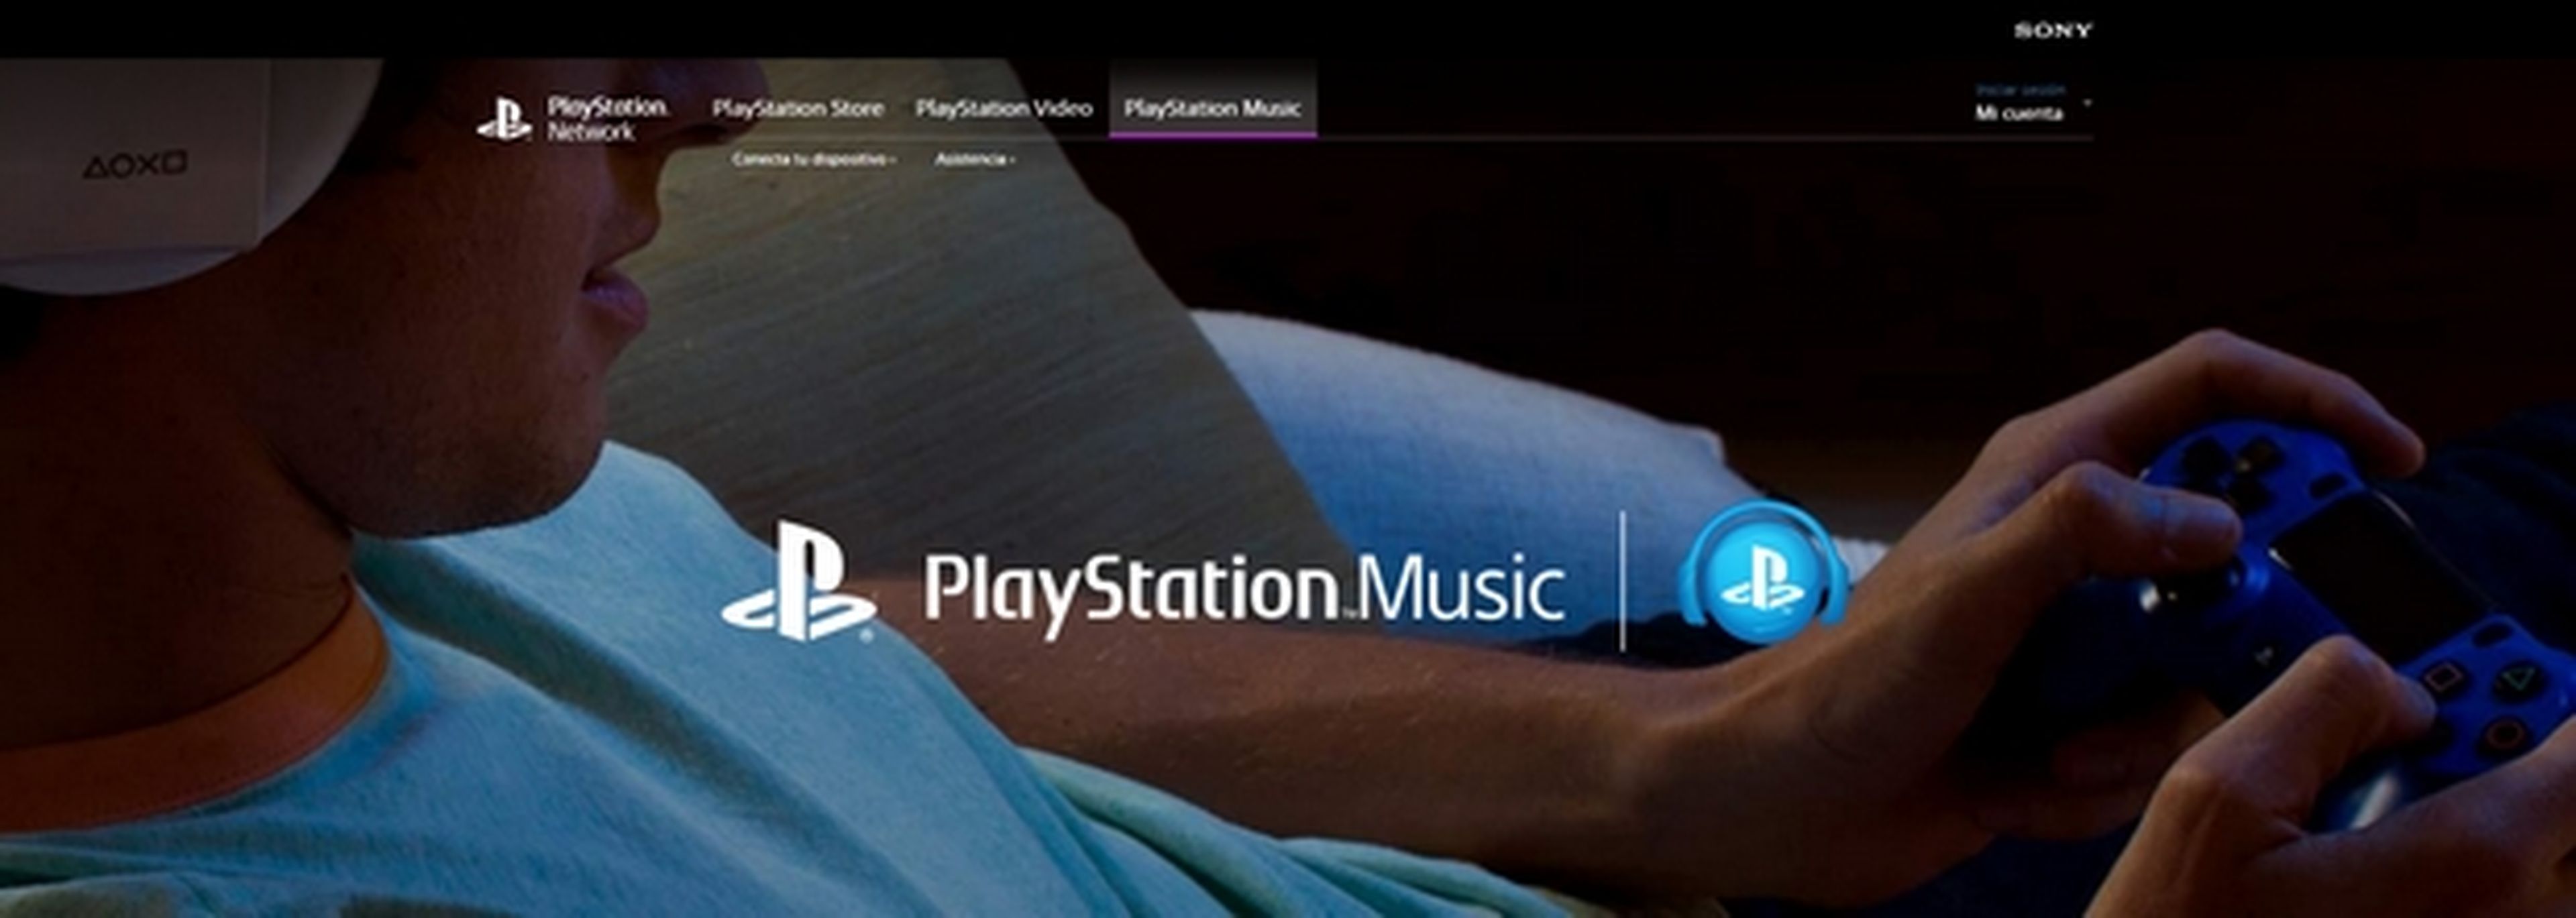 PlayStation Music con Spotify